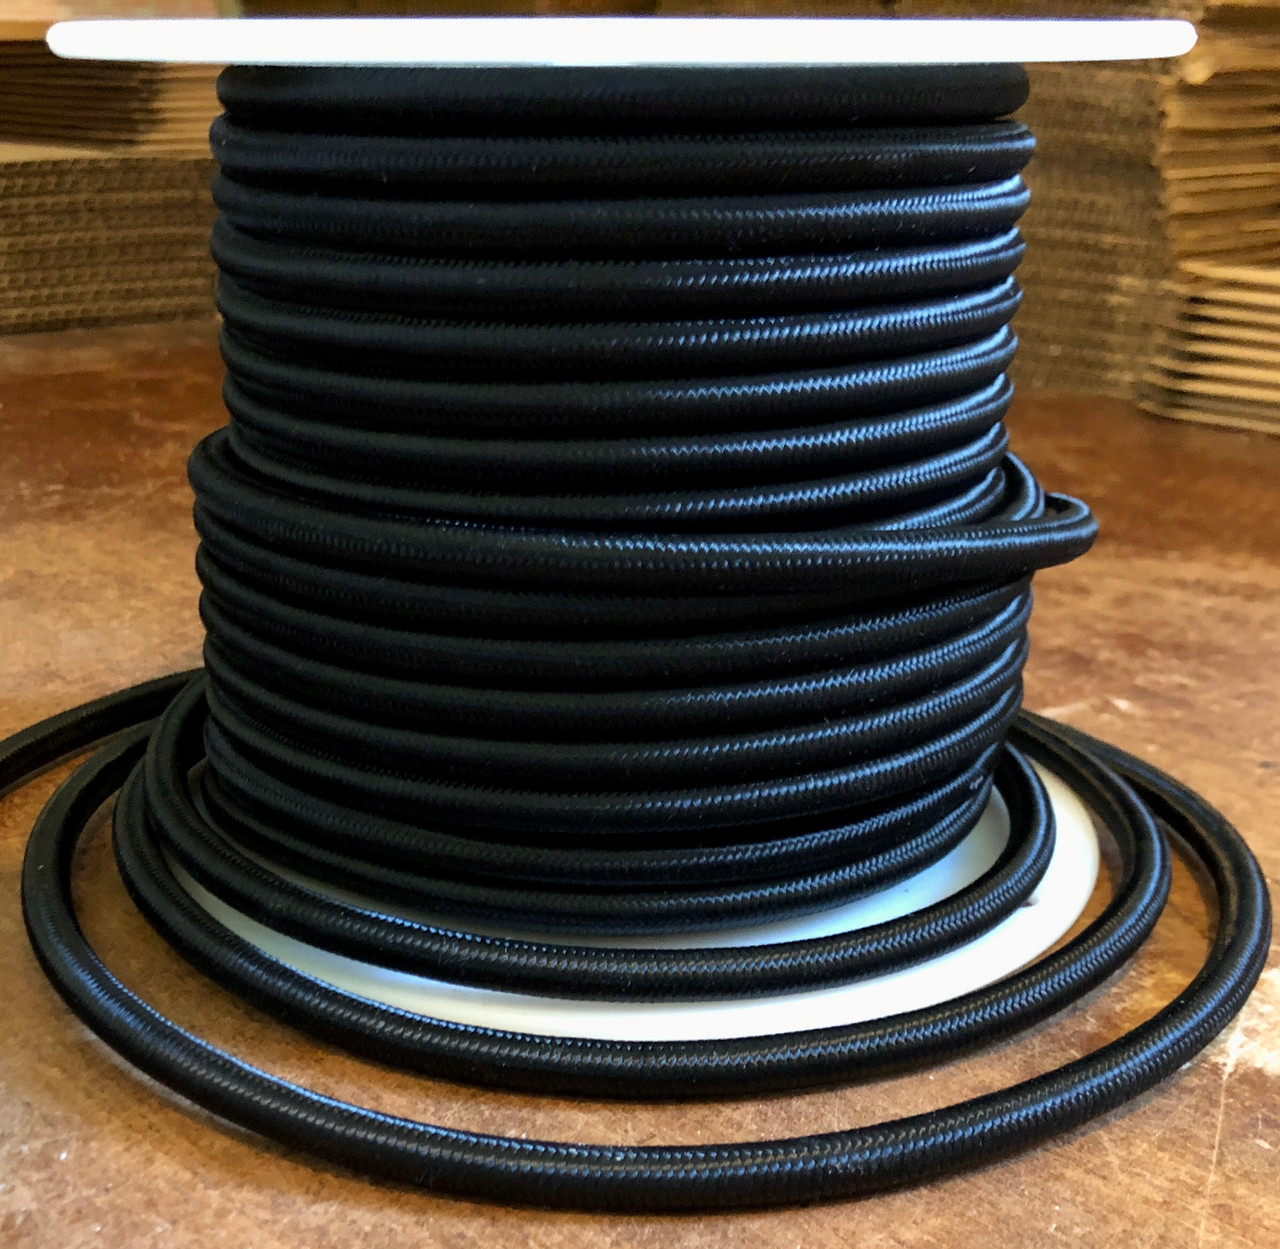 per foot-18 ga LAMP ac cord,BLACK TWISTED 3-wire CLOTH covered 